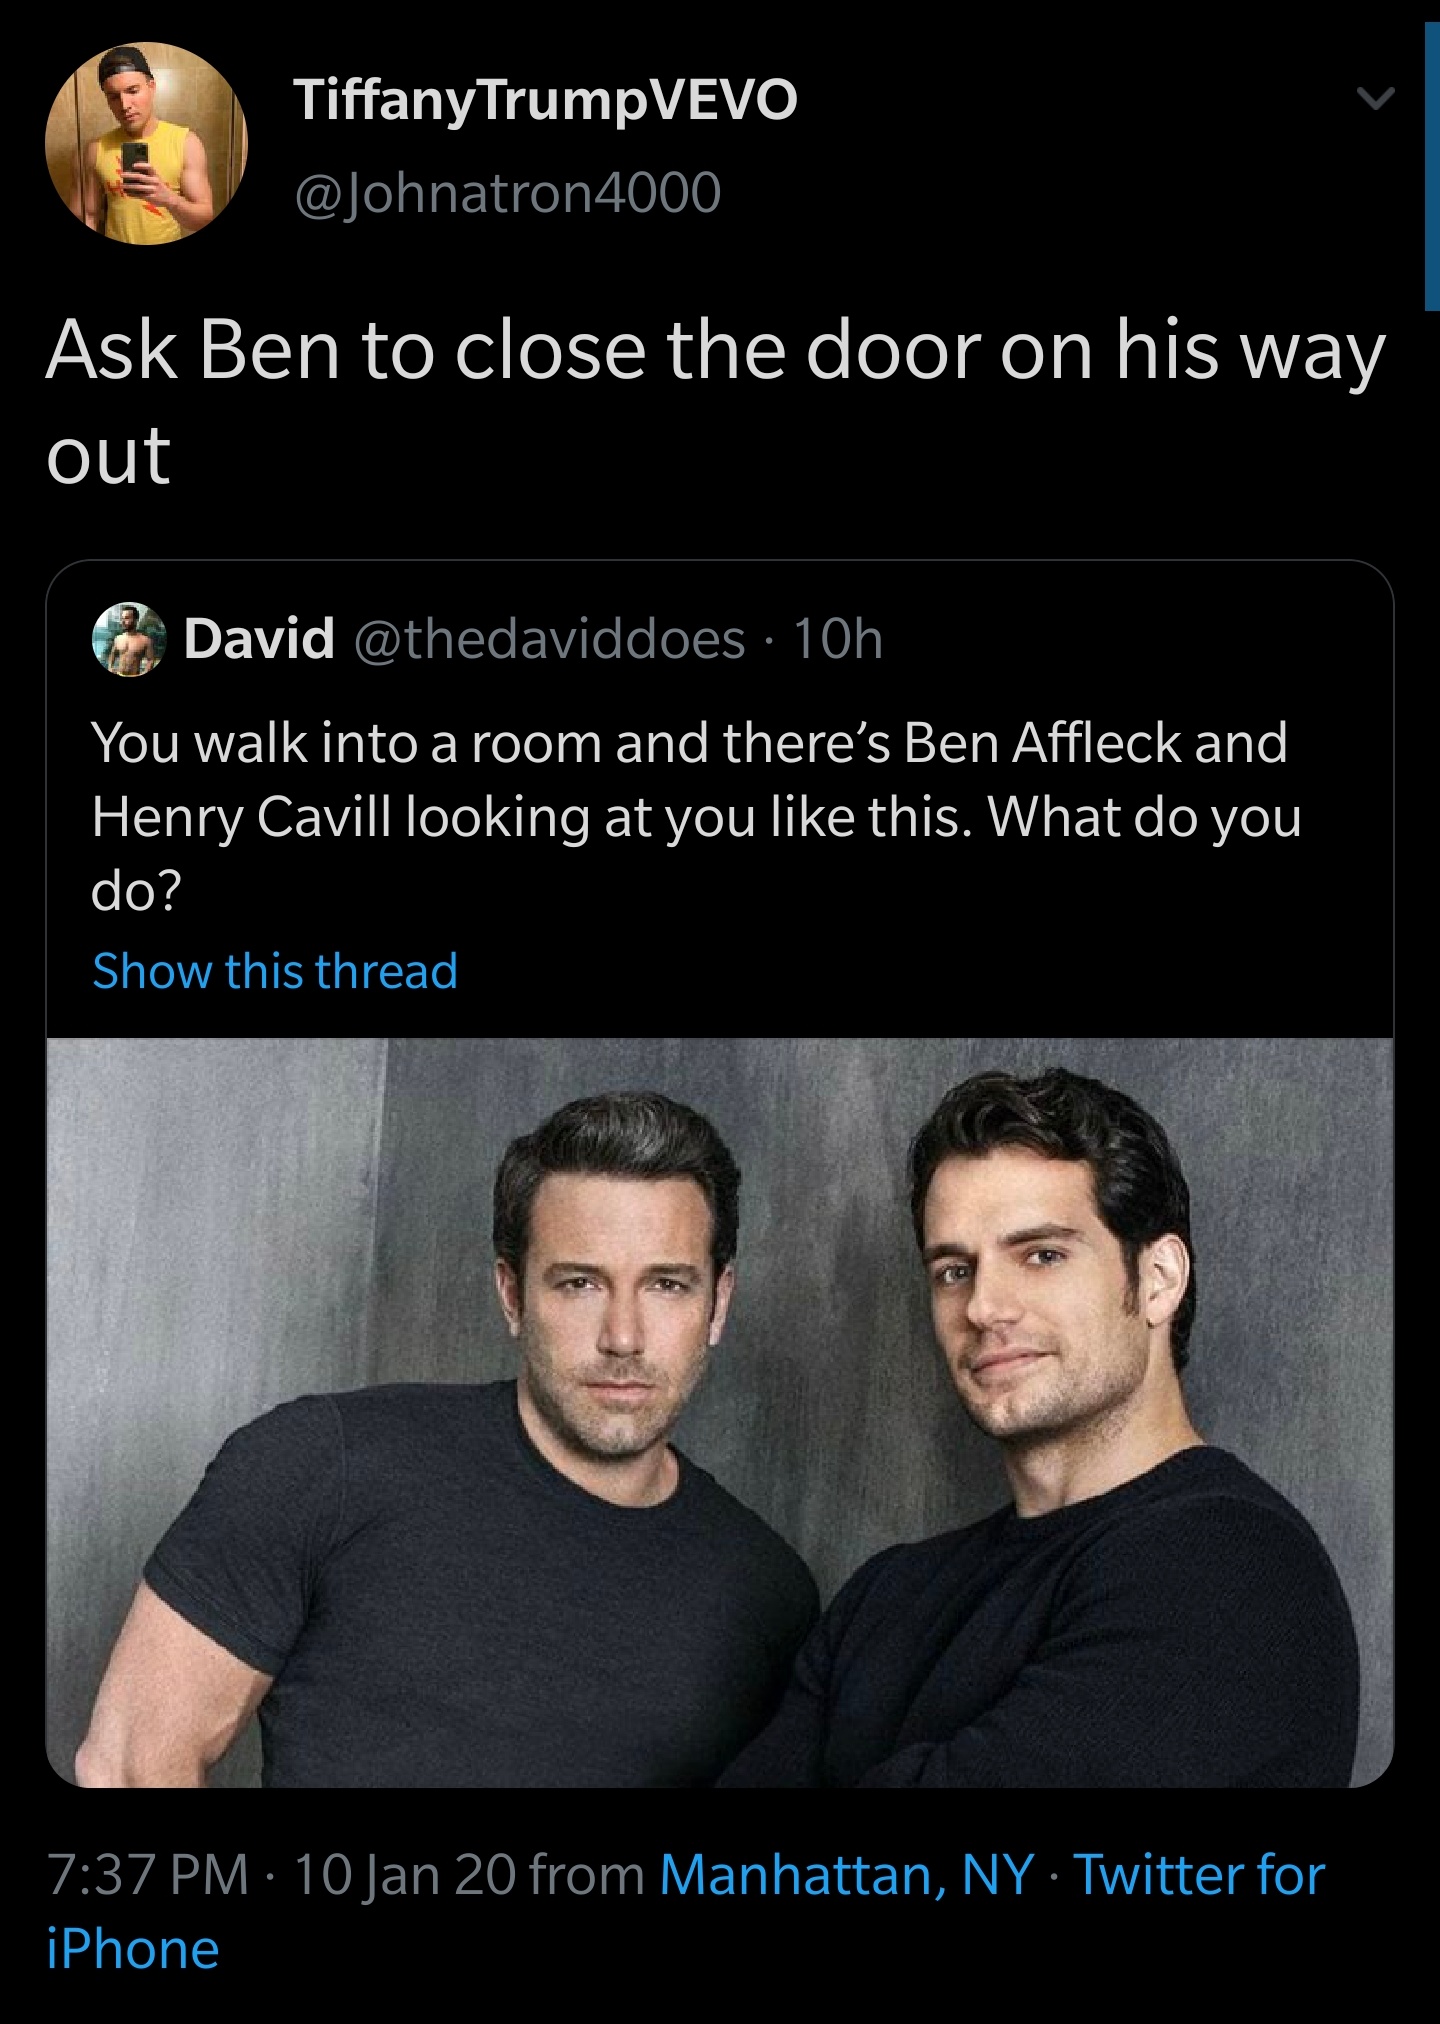 photo caption - TiffanyTrumpVEVO 4000 Ask Ben to close the door on his way out David 10h You walk into a room and there's Ben Affleck and Henry Cavill looking at you this. What do you do? Show this thread 10 Jan 20 from Manhattan, Ny Twitter for iPhone